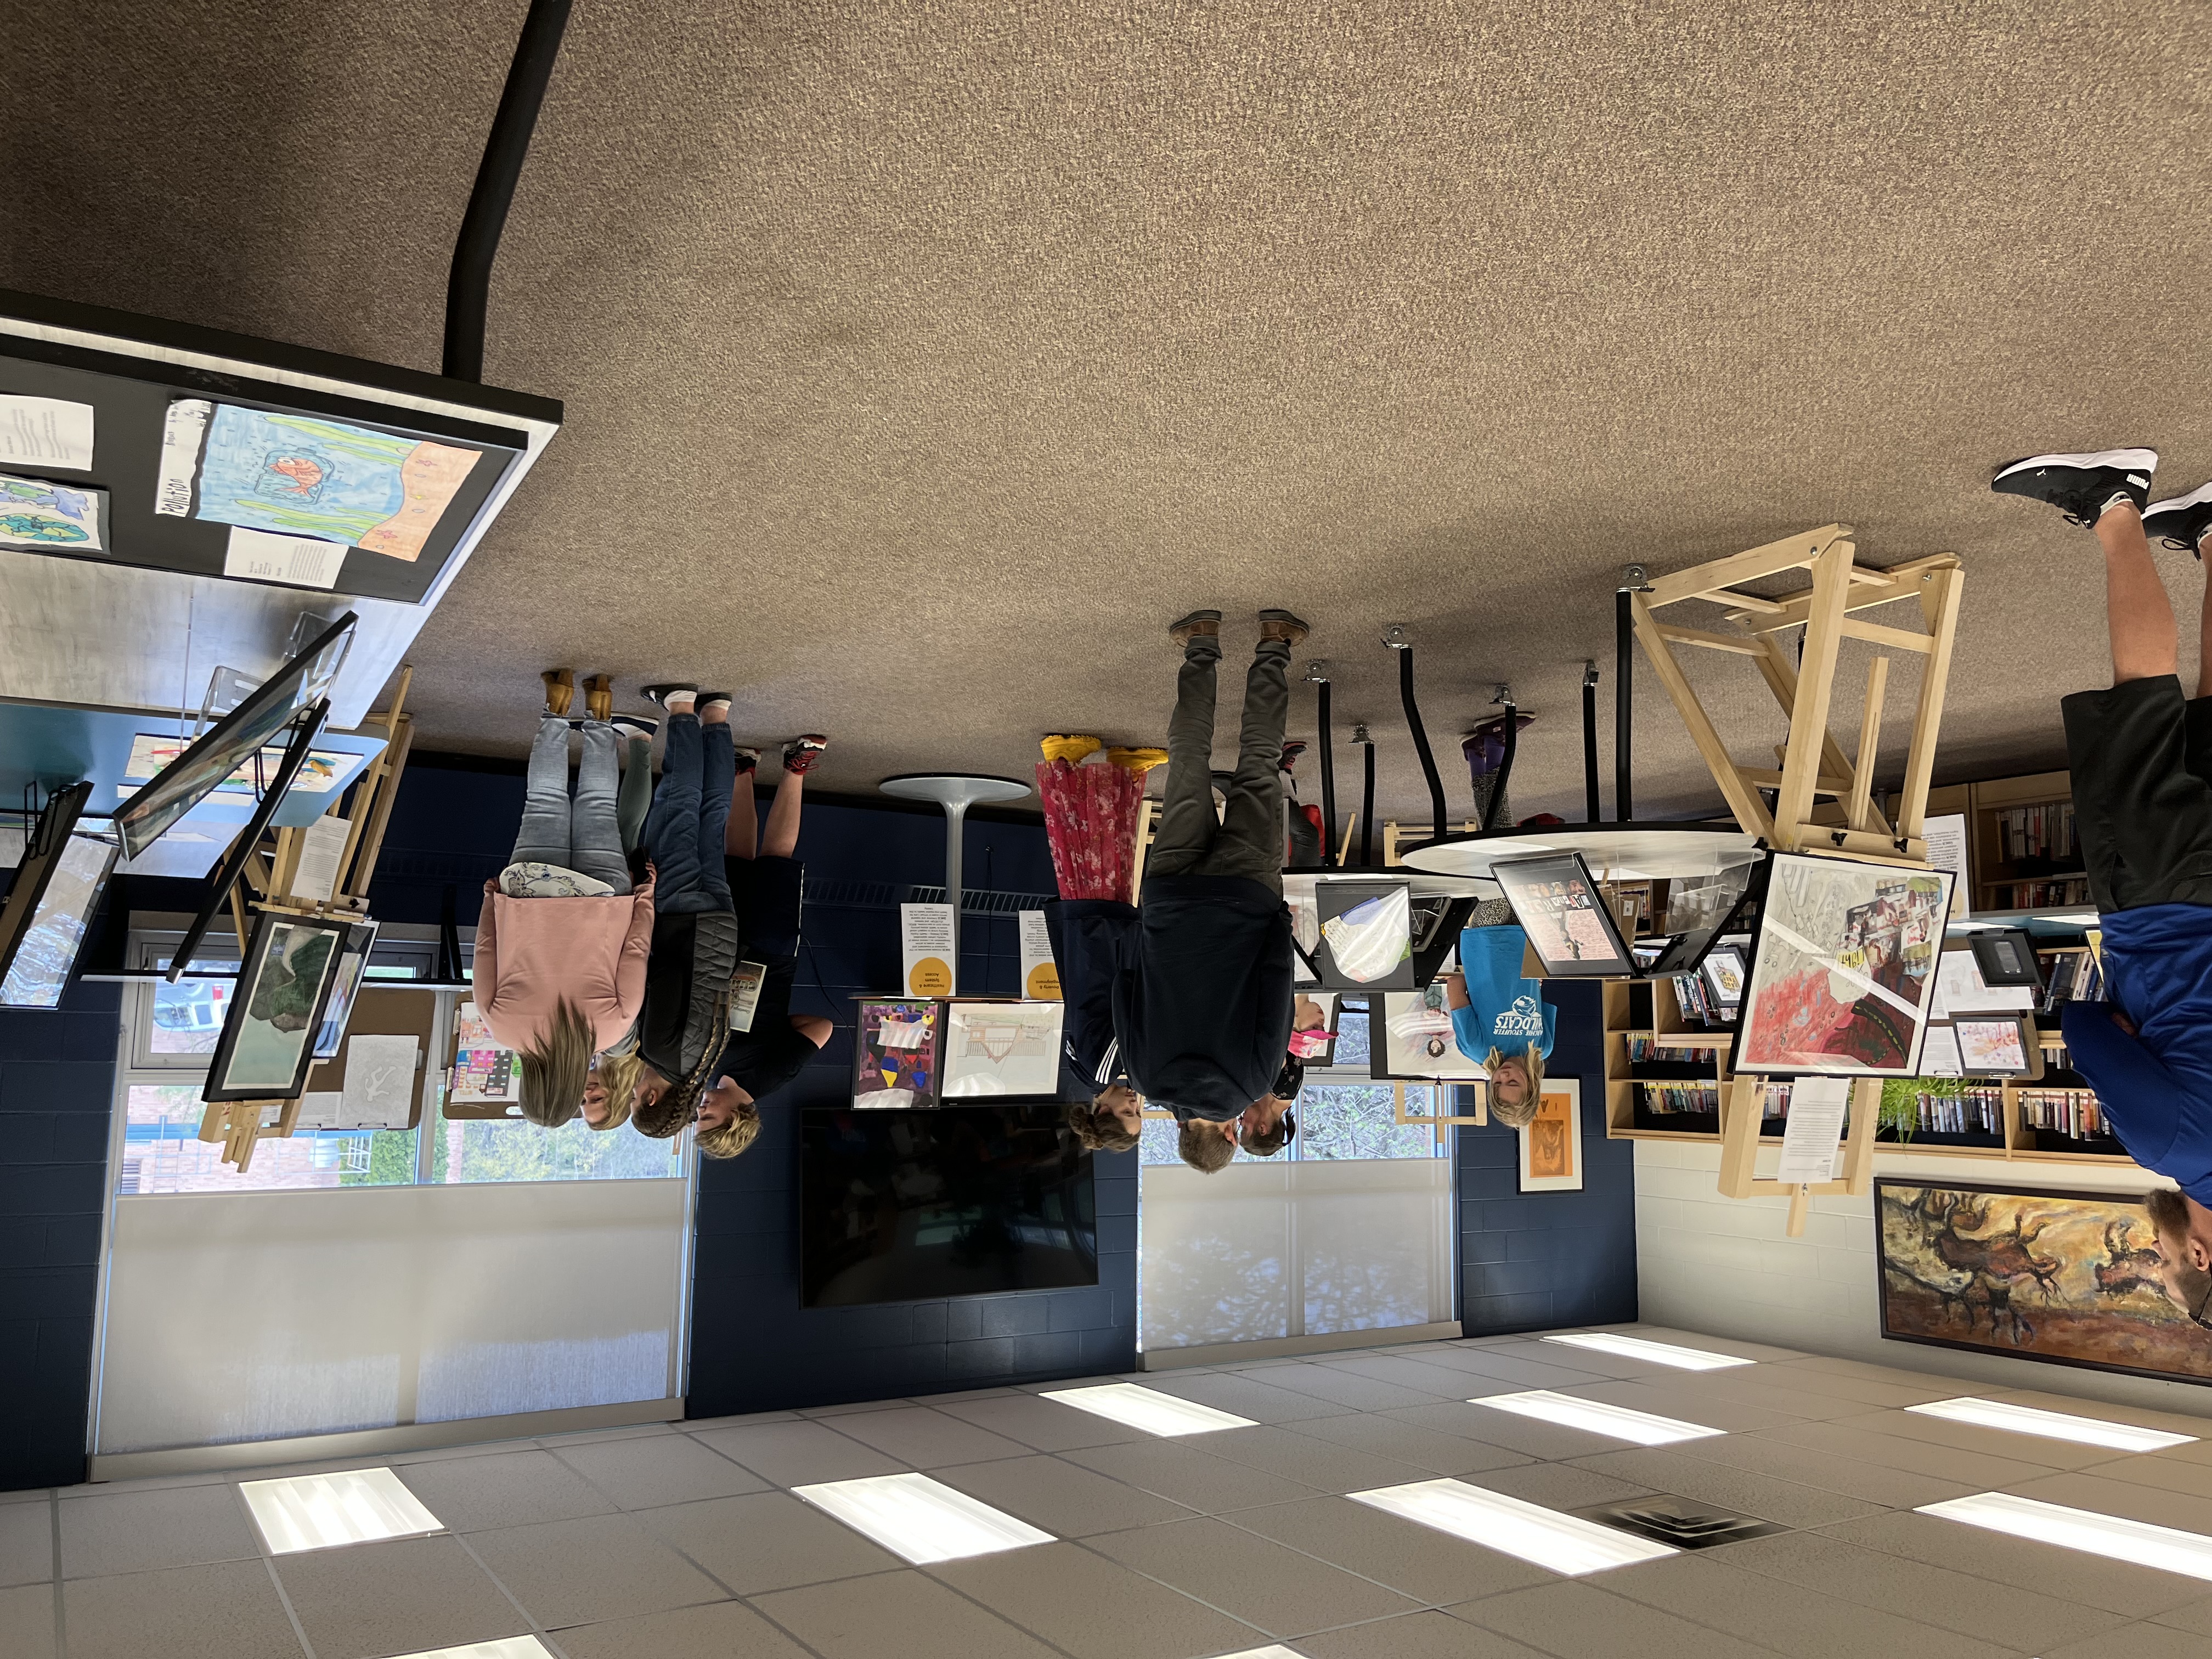 A view of the CSWB Youth Art Exhibition held at HHSS on May 10. Artwork arranged on easels can be seen in foreground and background. People around the room, both kids and adults, are looking at the artwork.